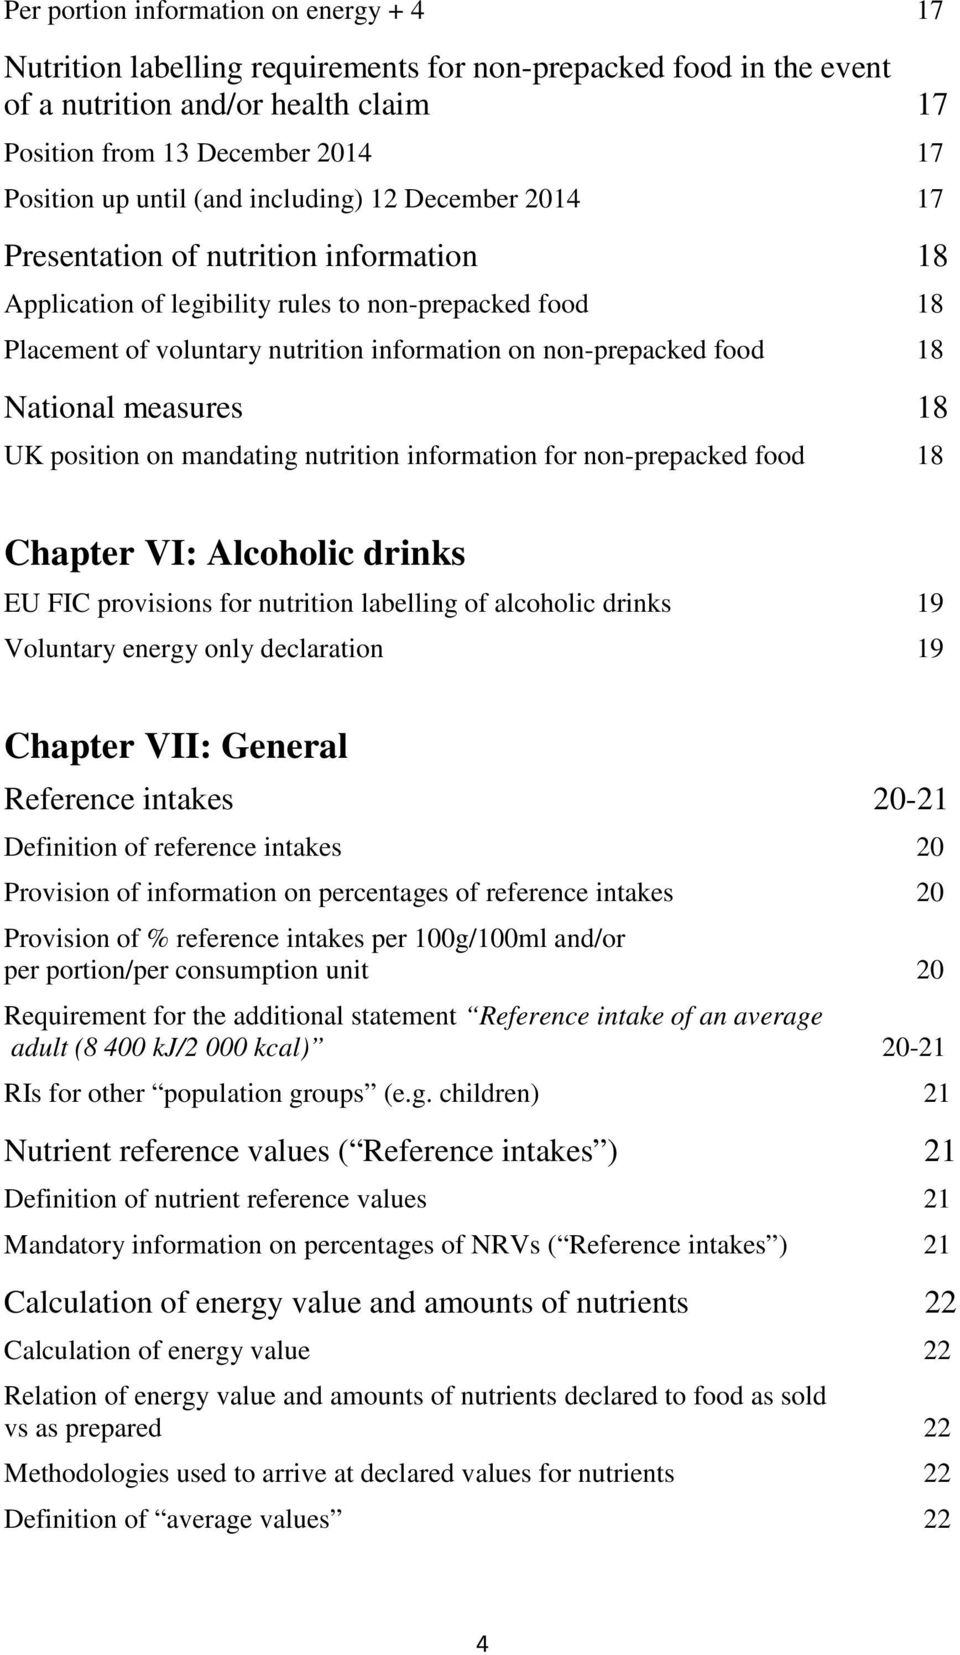 food 18 National measures 18 UK position on mandating nutrition information for non-prepacked food 18 Chapter VI: Alcoholic drinks EU FIC provisions for nutrition labelling of alcoholic drinks 19